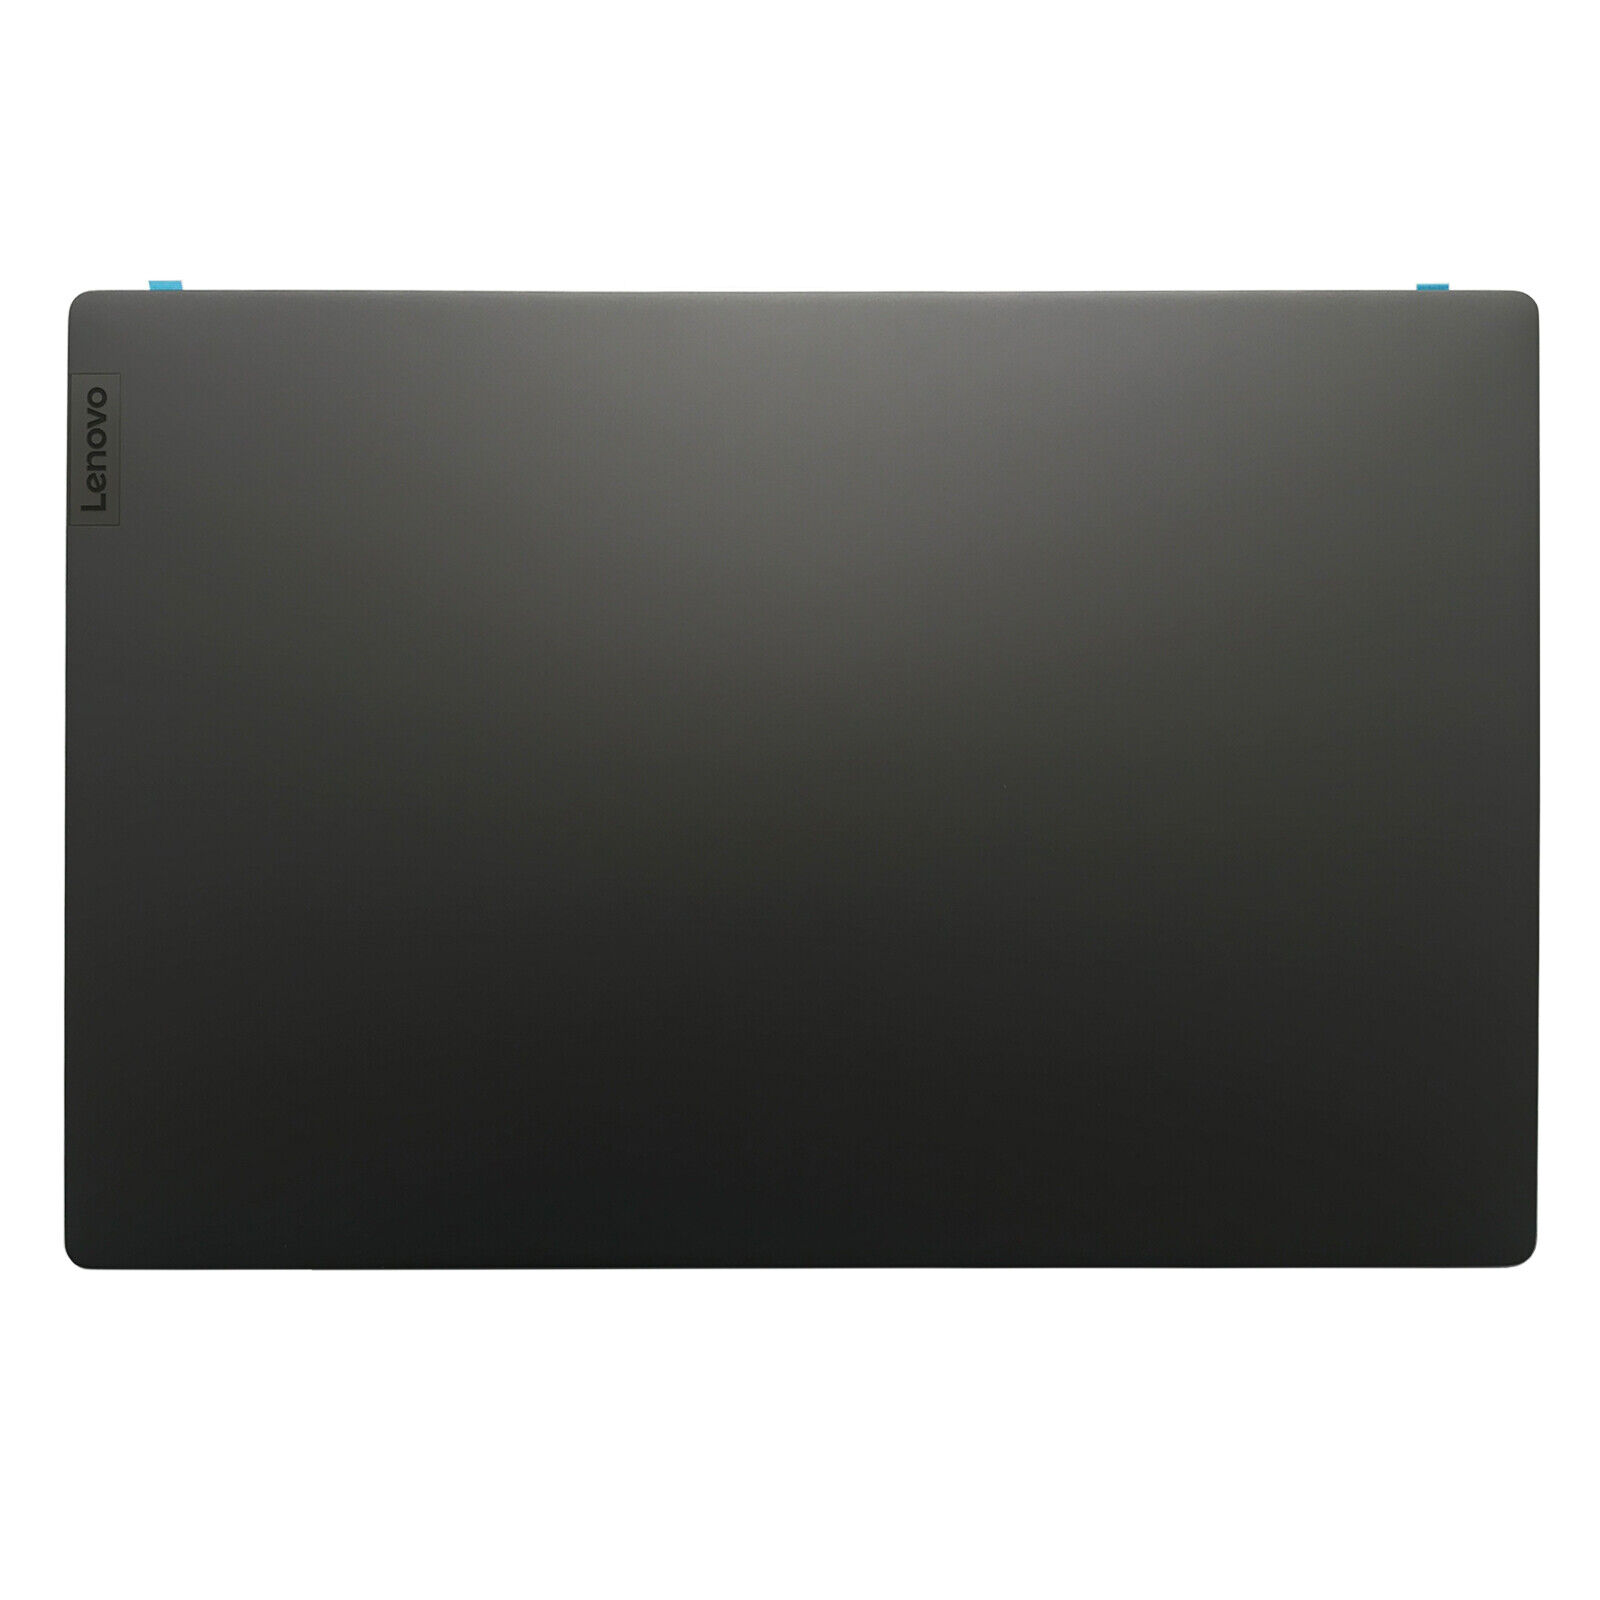 New For Lenovo ideapad 5 15IIL05 15ARE05 15ITL05 LCD Back Top Case Rear Cover